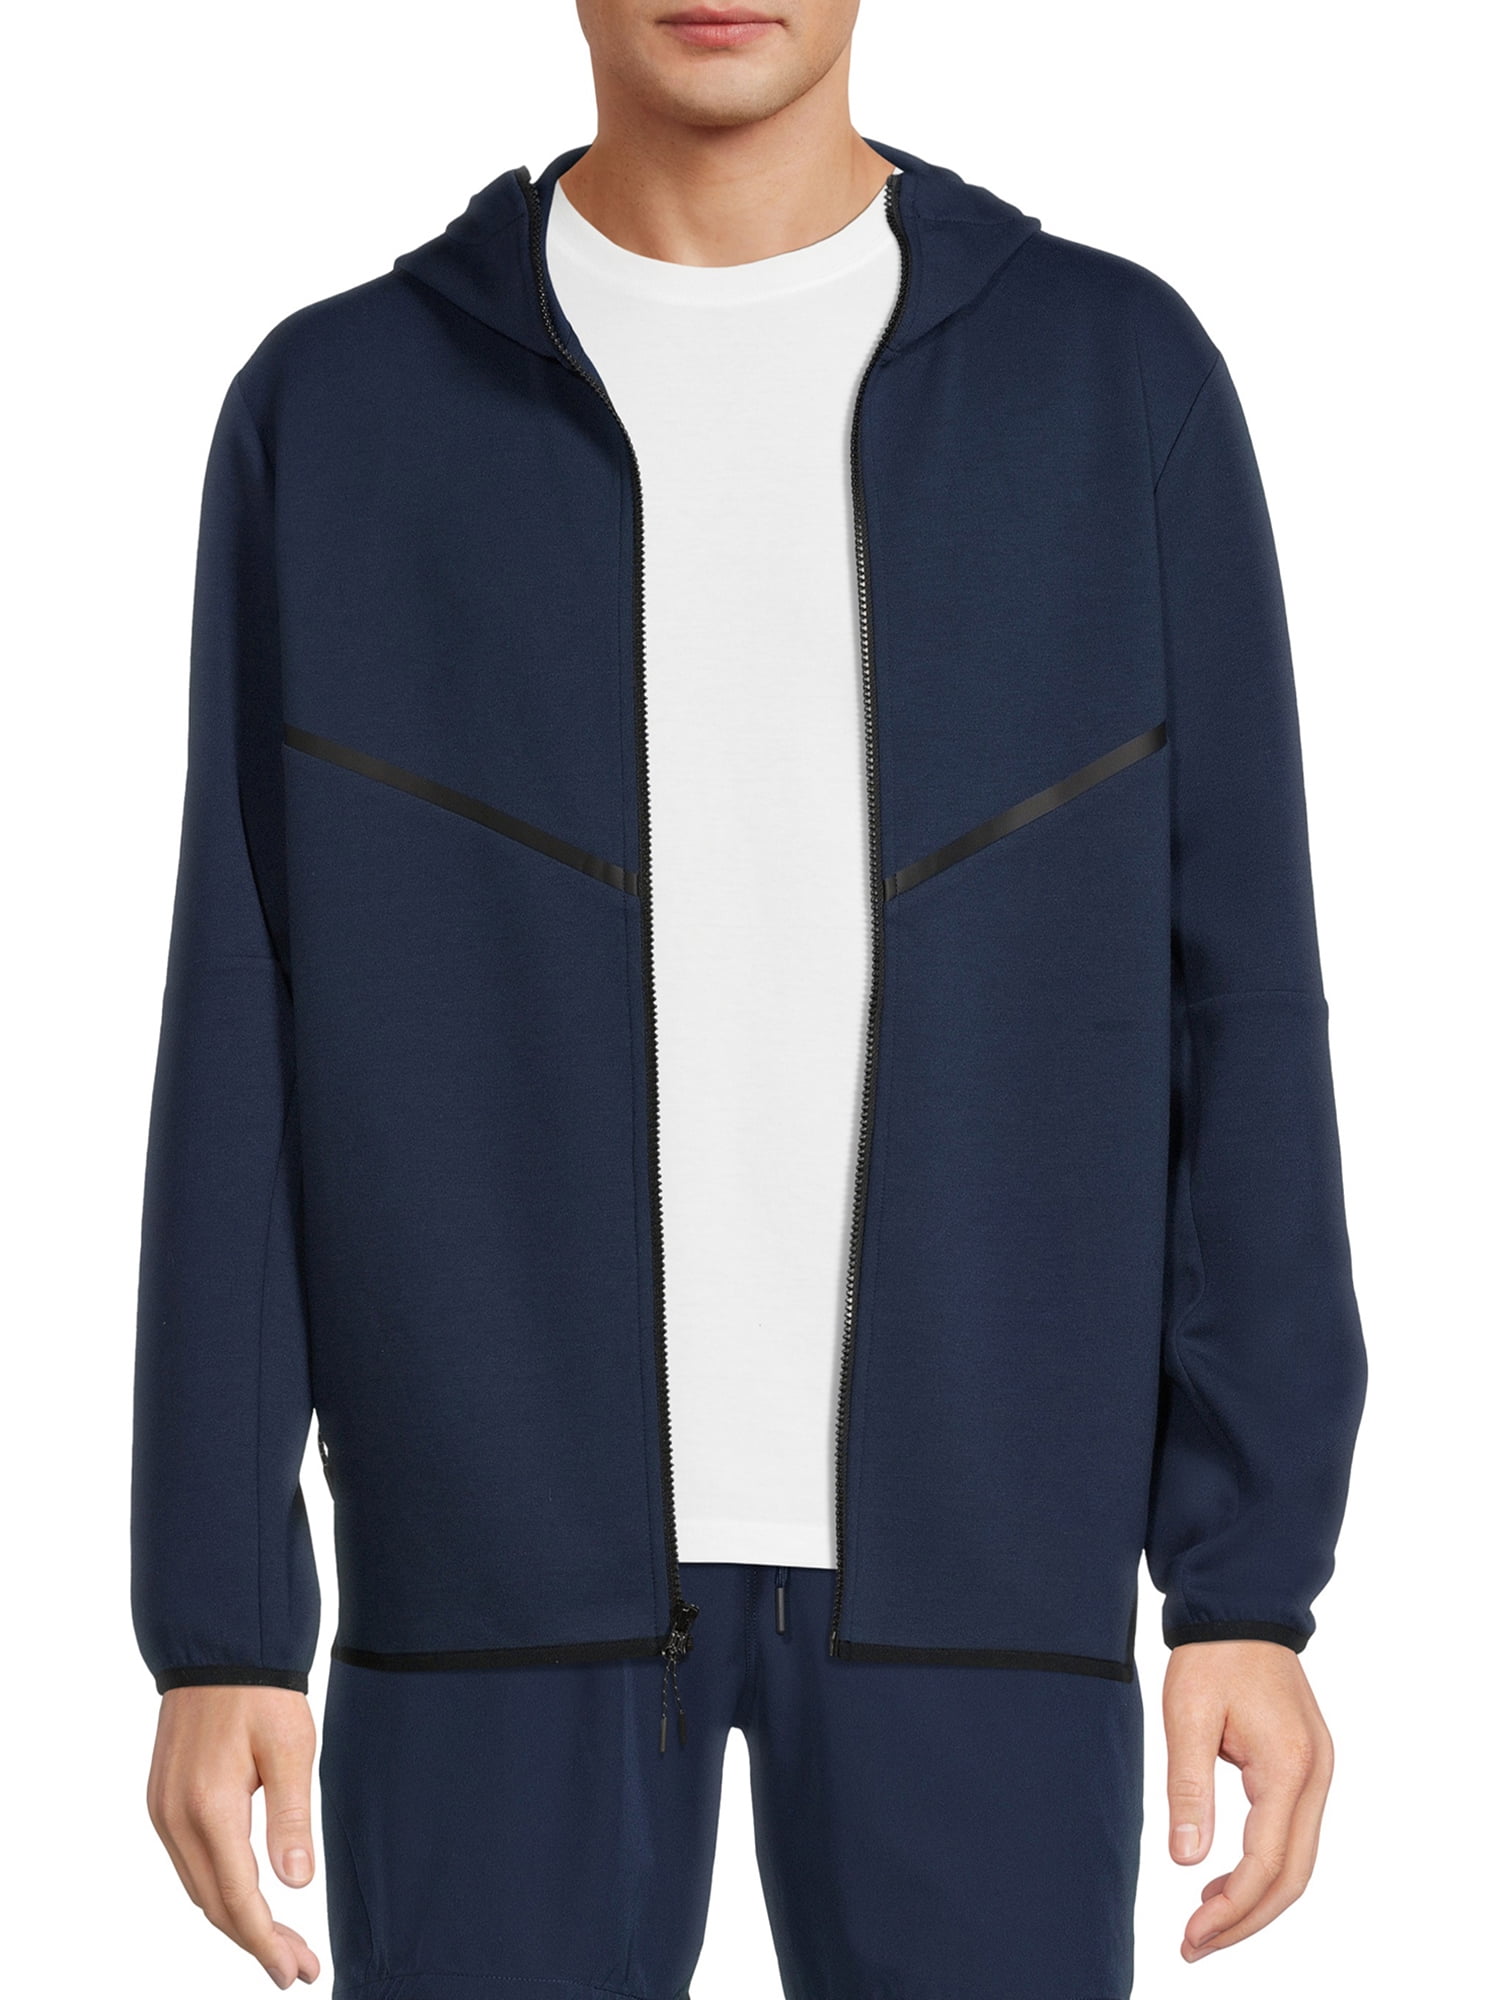 Russell Men’s Fusion Knit Jacket